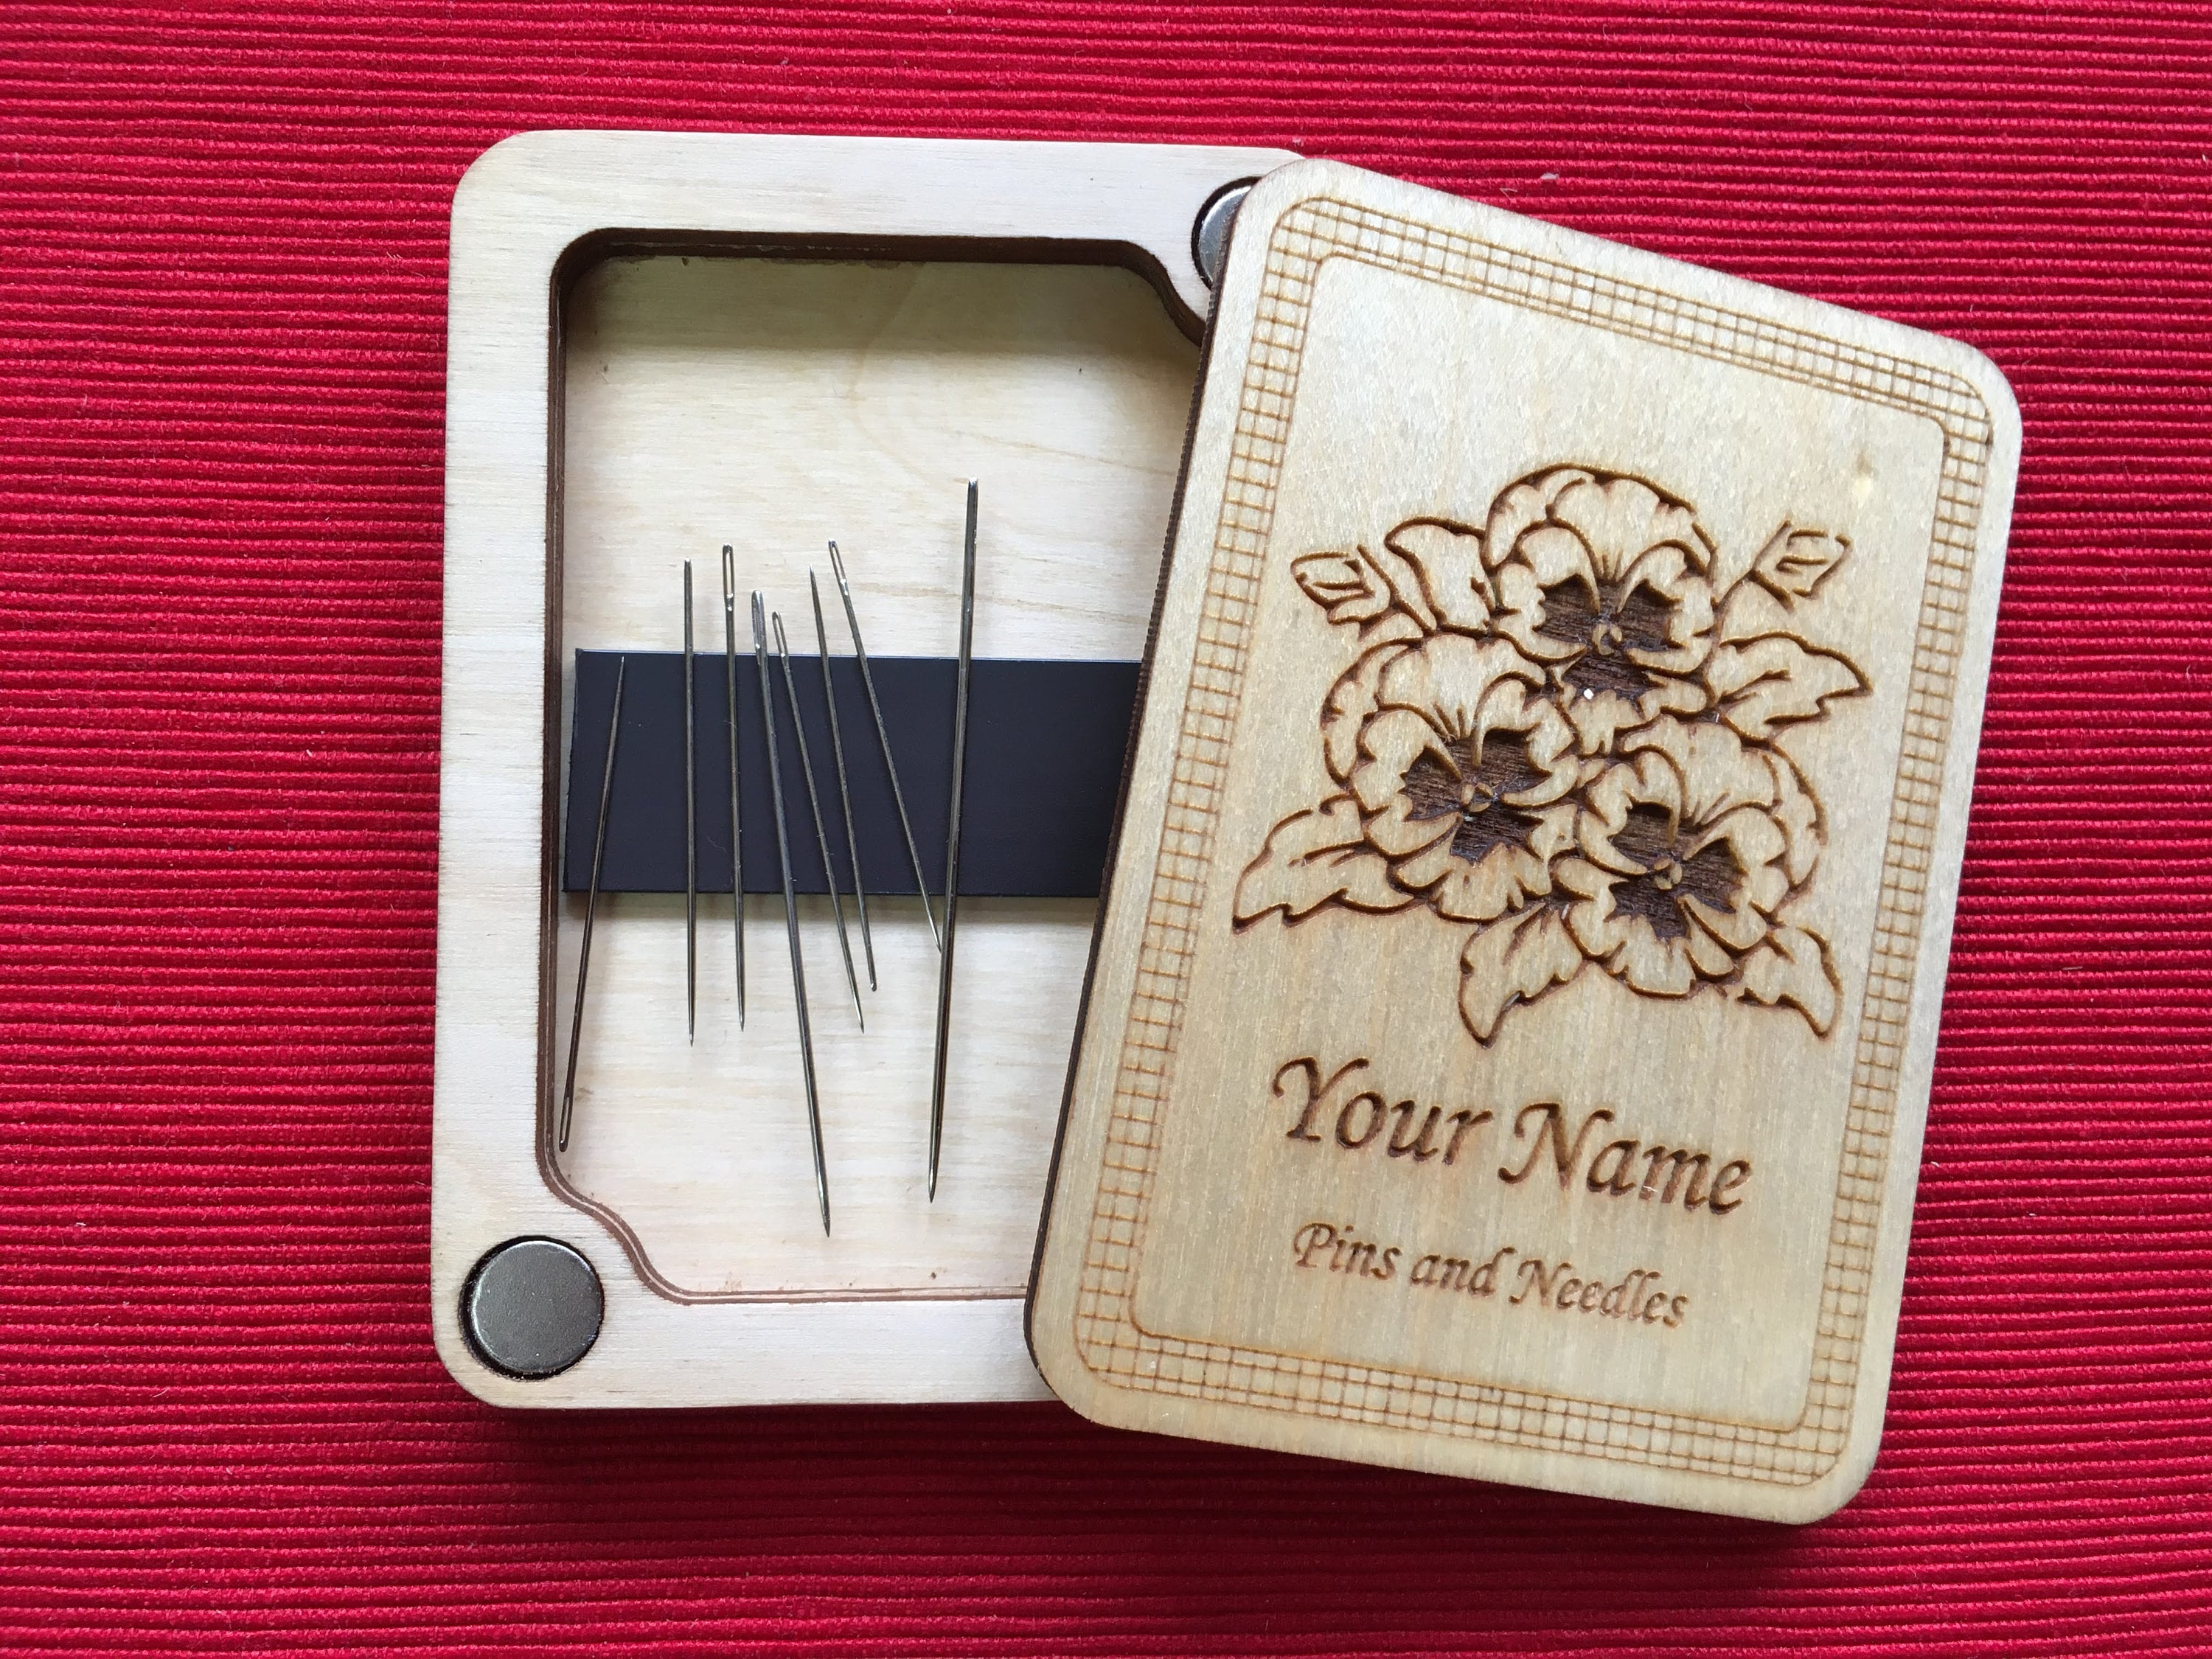 Needlework needle minder with magnet sewing supply holder embroidery organizer with lid needlepoint gifts mini wooden needle case box